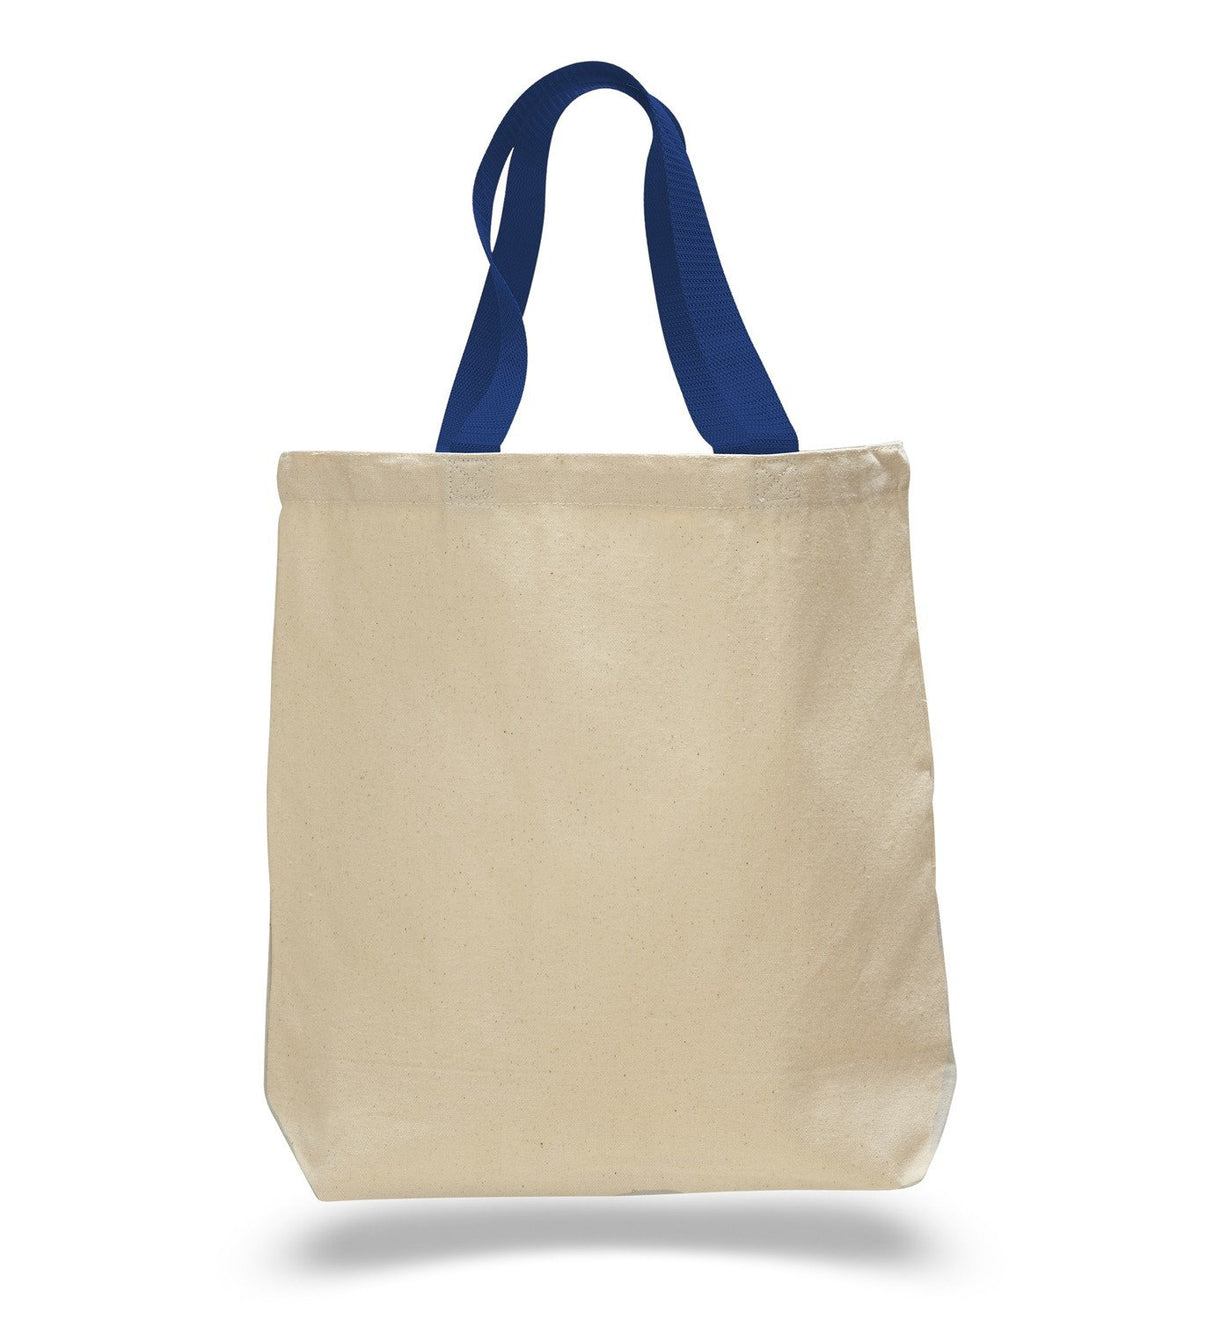 Promotional Cotton Tote Bags with Royal Handles